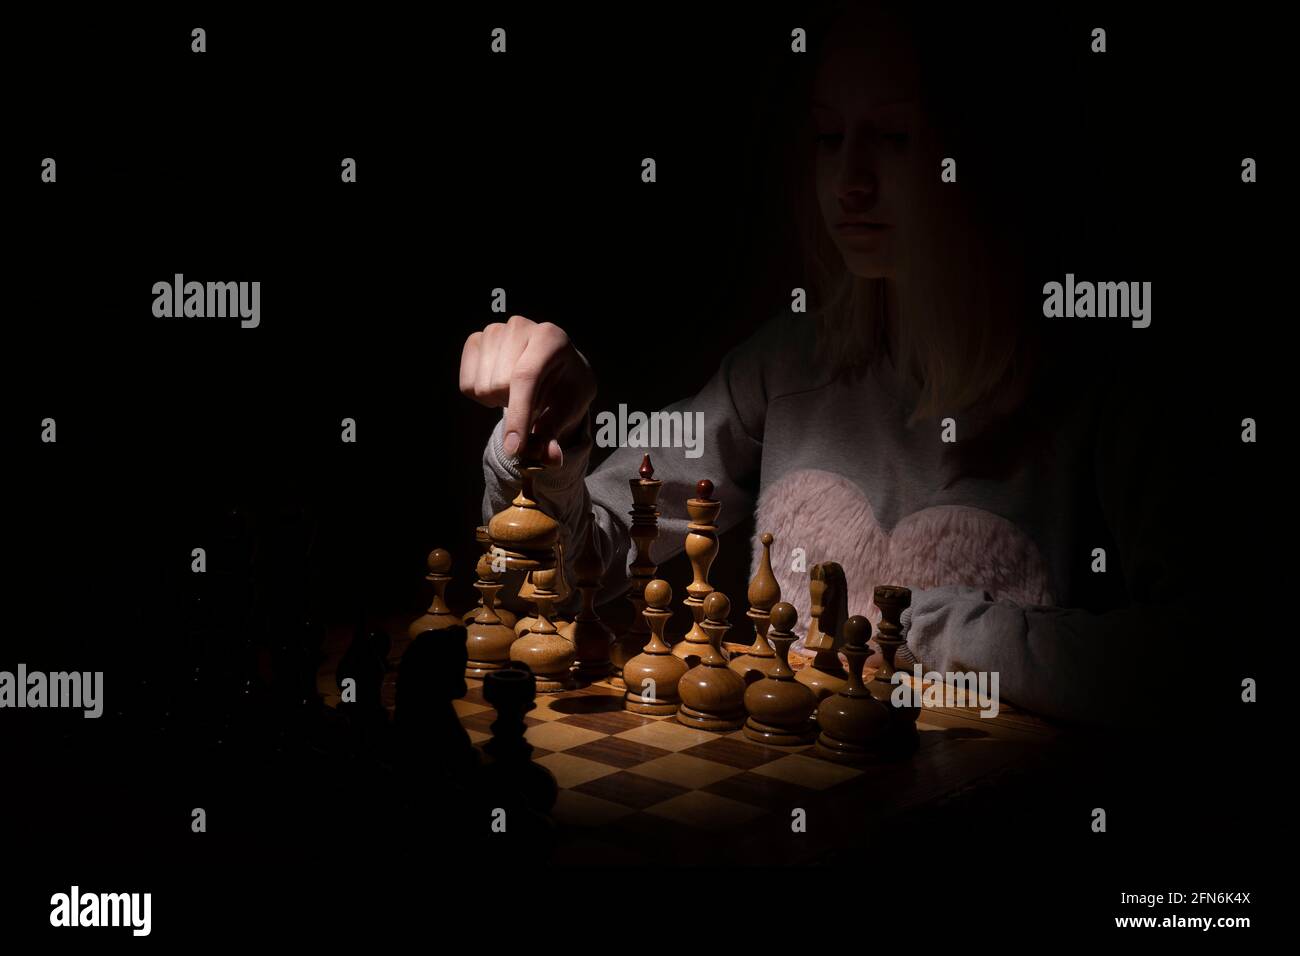 girl in the shadows plays vintage chess on a dark background. old chess. business concept Stock Photo